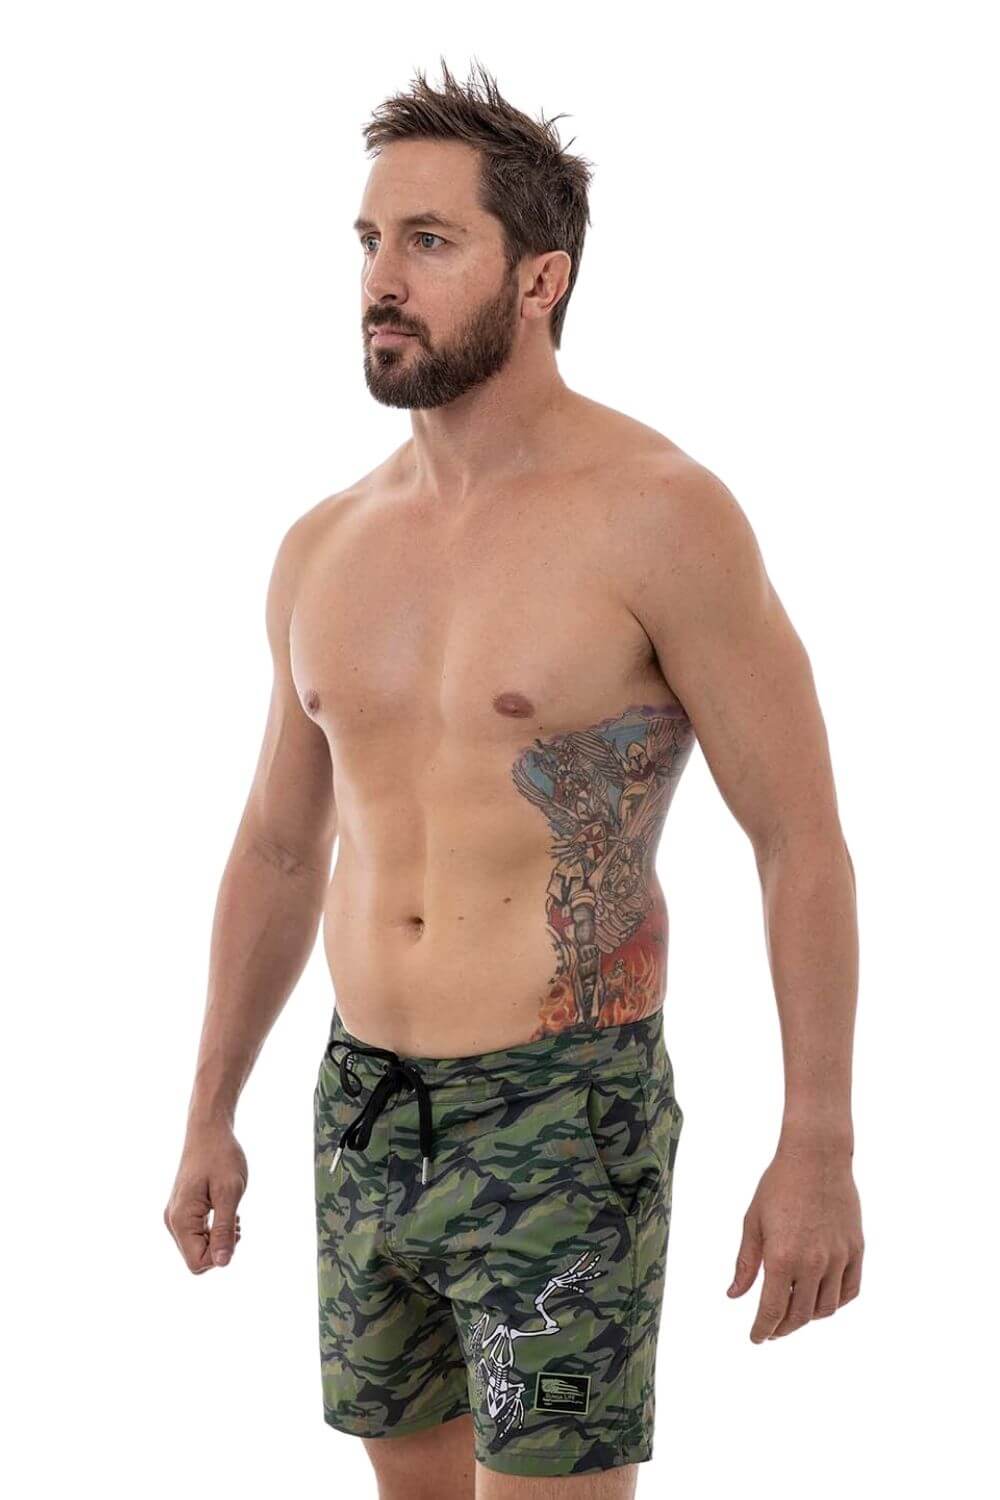 Underwear Native Fit Fusion Unisex Sexy Striped Camo White Forest Green  Brown Commando Conform Body Hugging Briefs Lingerie Boy Shorts Girl -   Norway